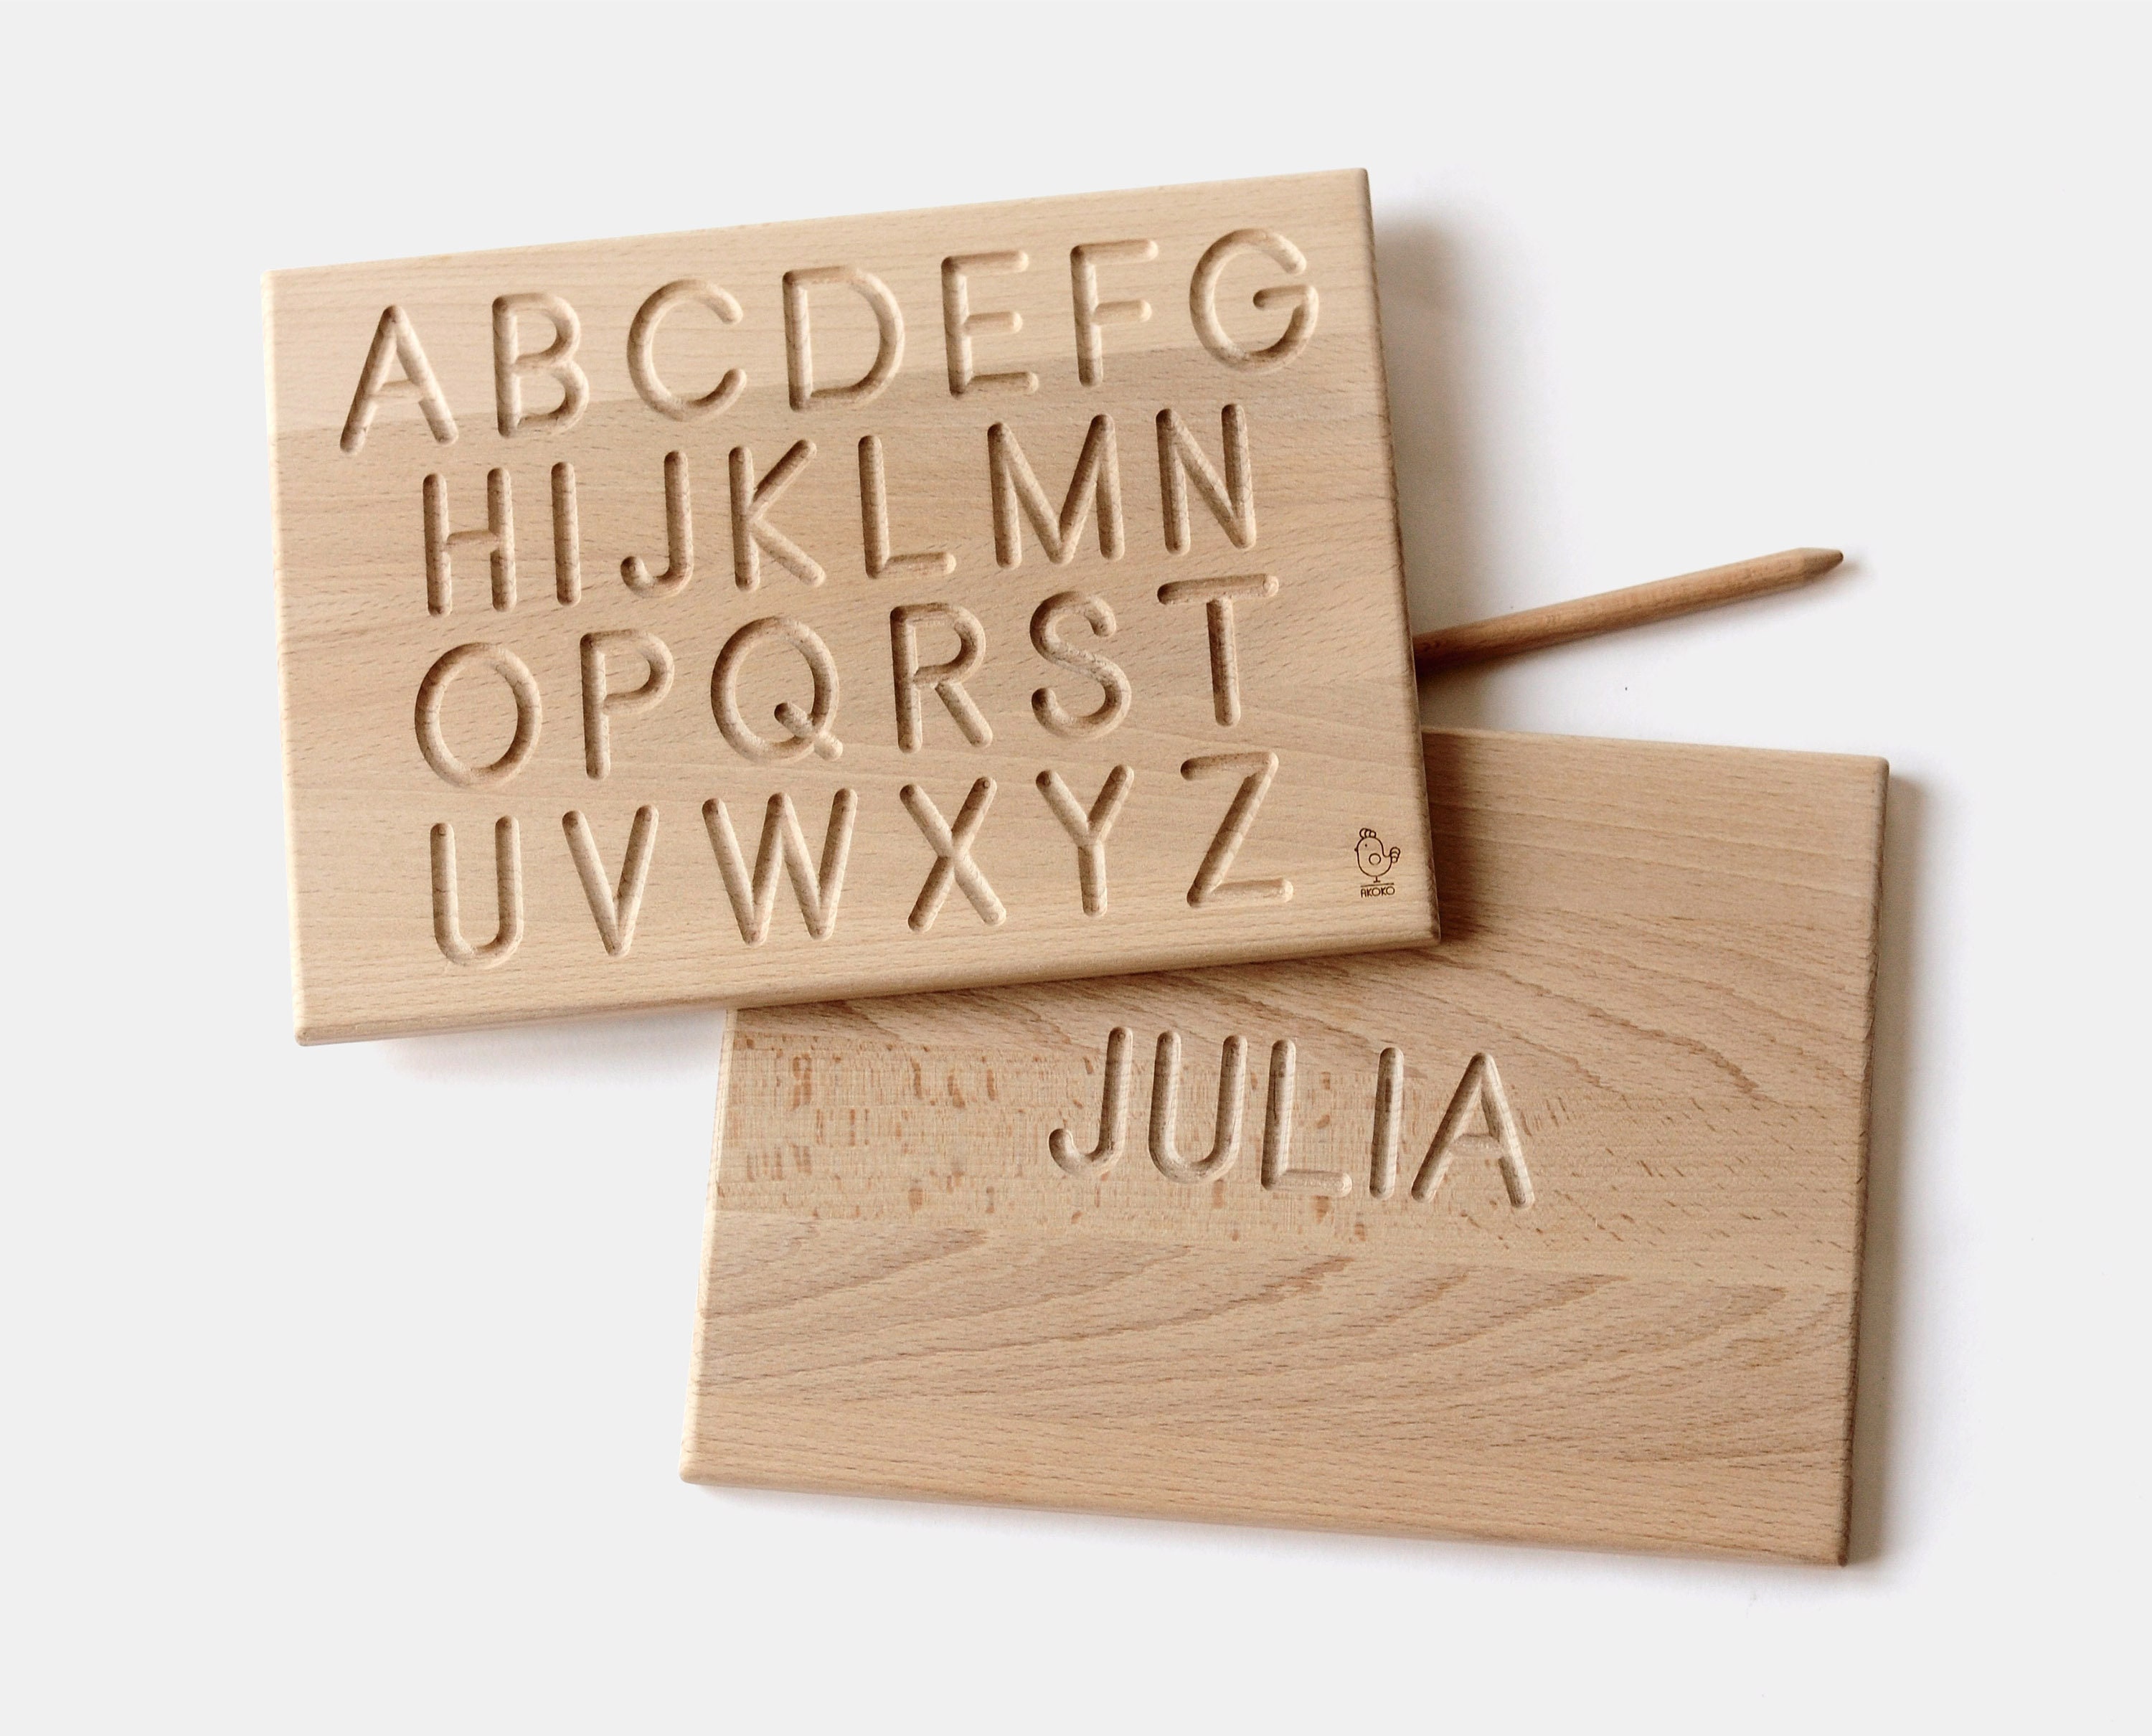 Double-Sided Alphabet and Number Tracing Boards – 15 Years+ Wooden Toys  Manufacturer